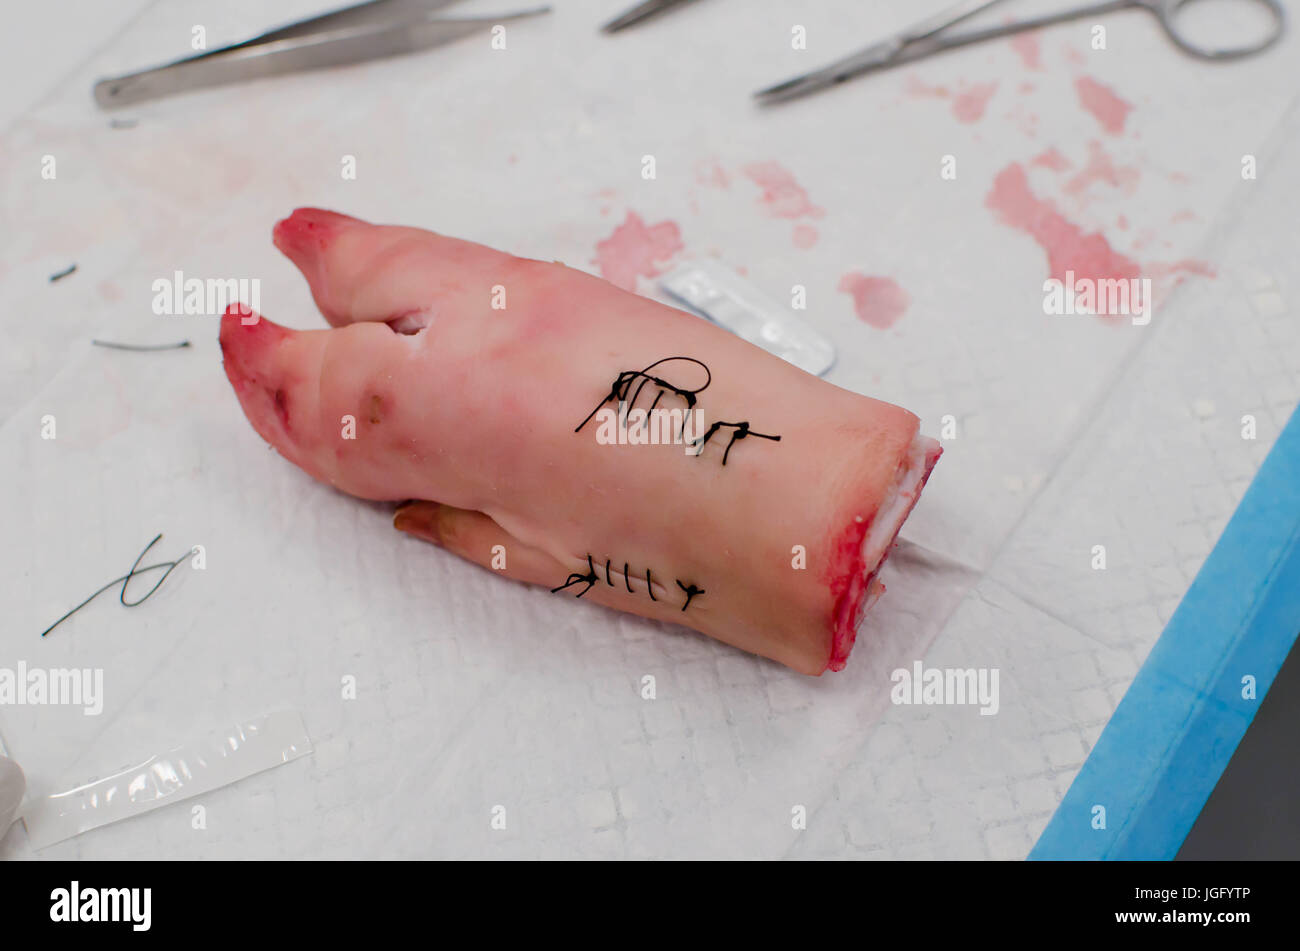 Sutures on a pig foot done by pre-med students for practice. Stock Photo